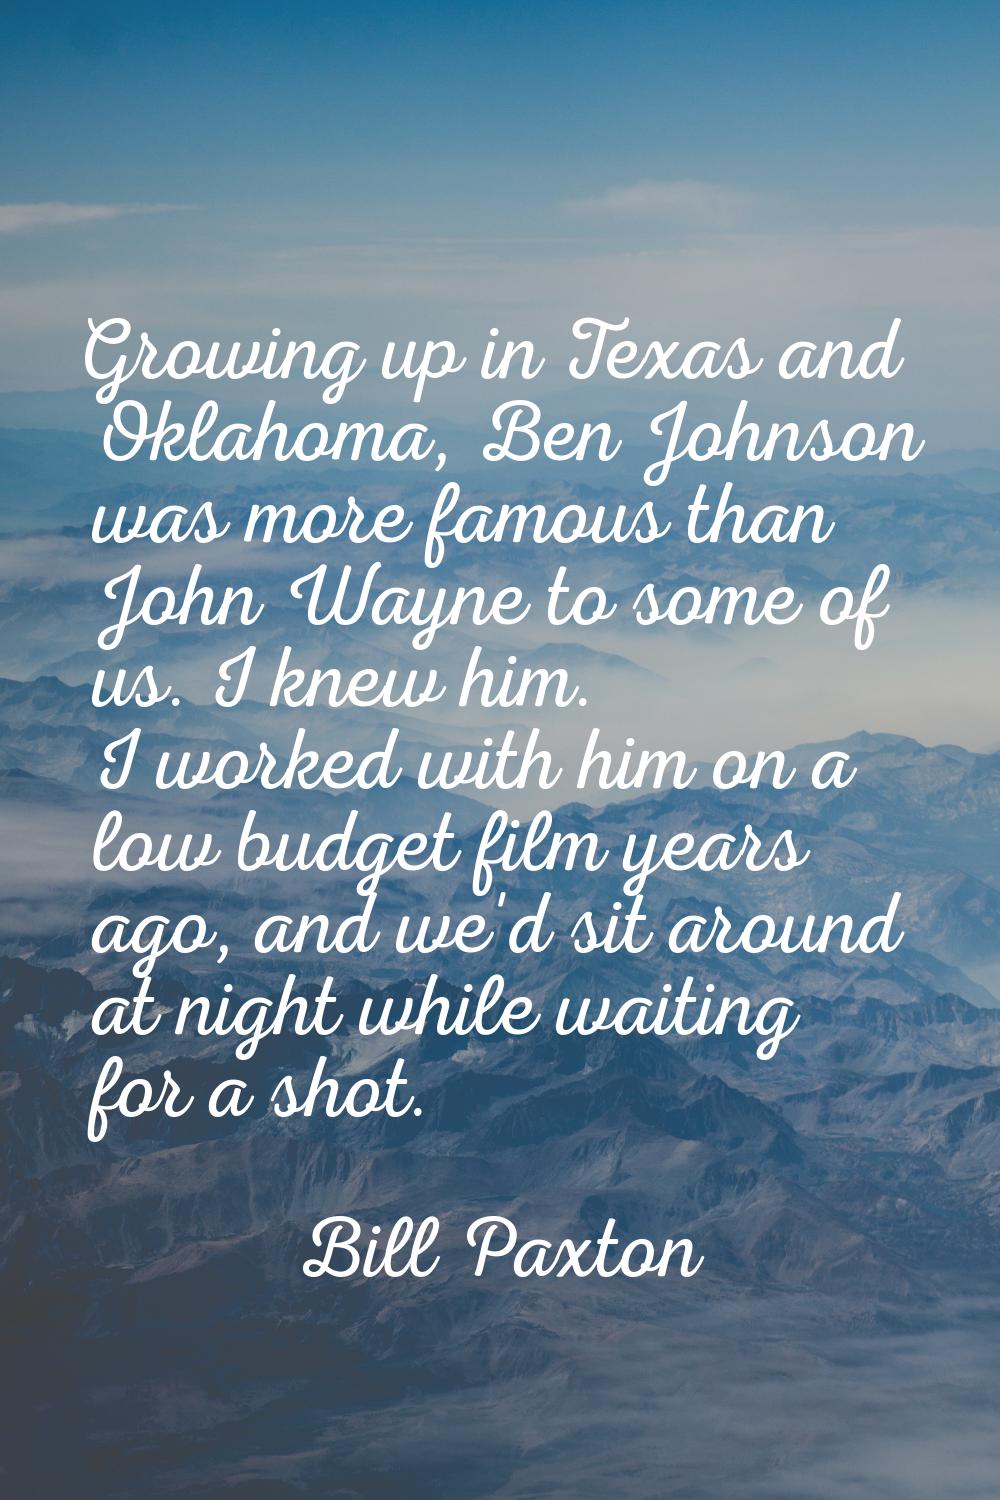 Growing up in Texas and Oklahoma, Ben Johnson was more famous than John Wayne to some of us. I knew